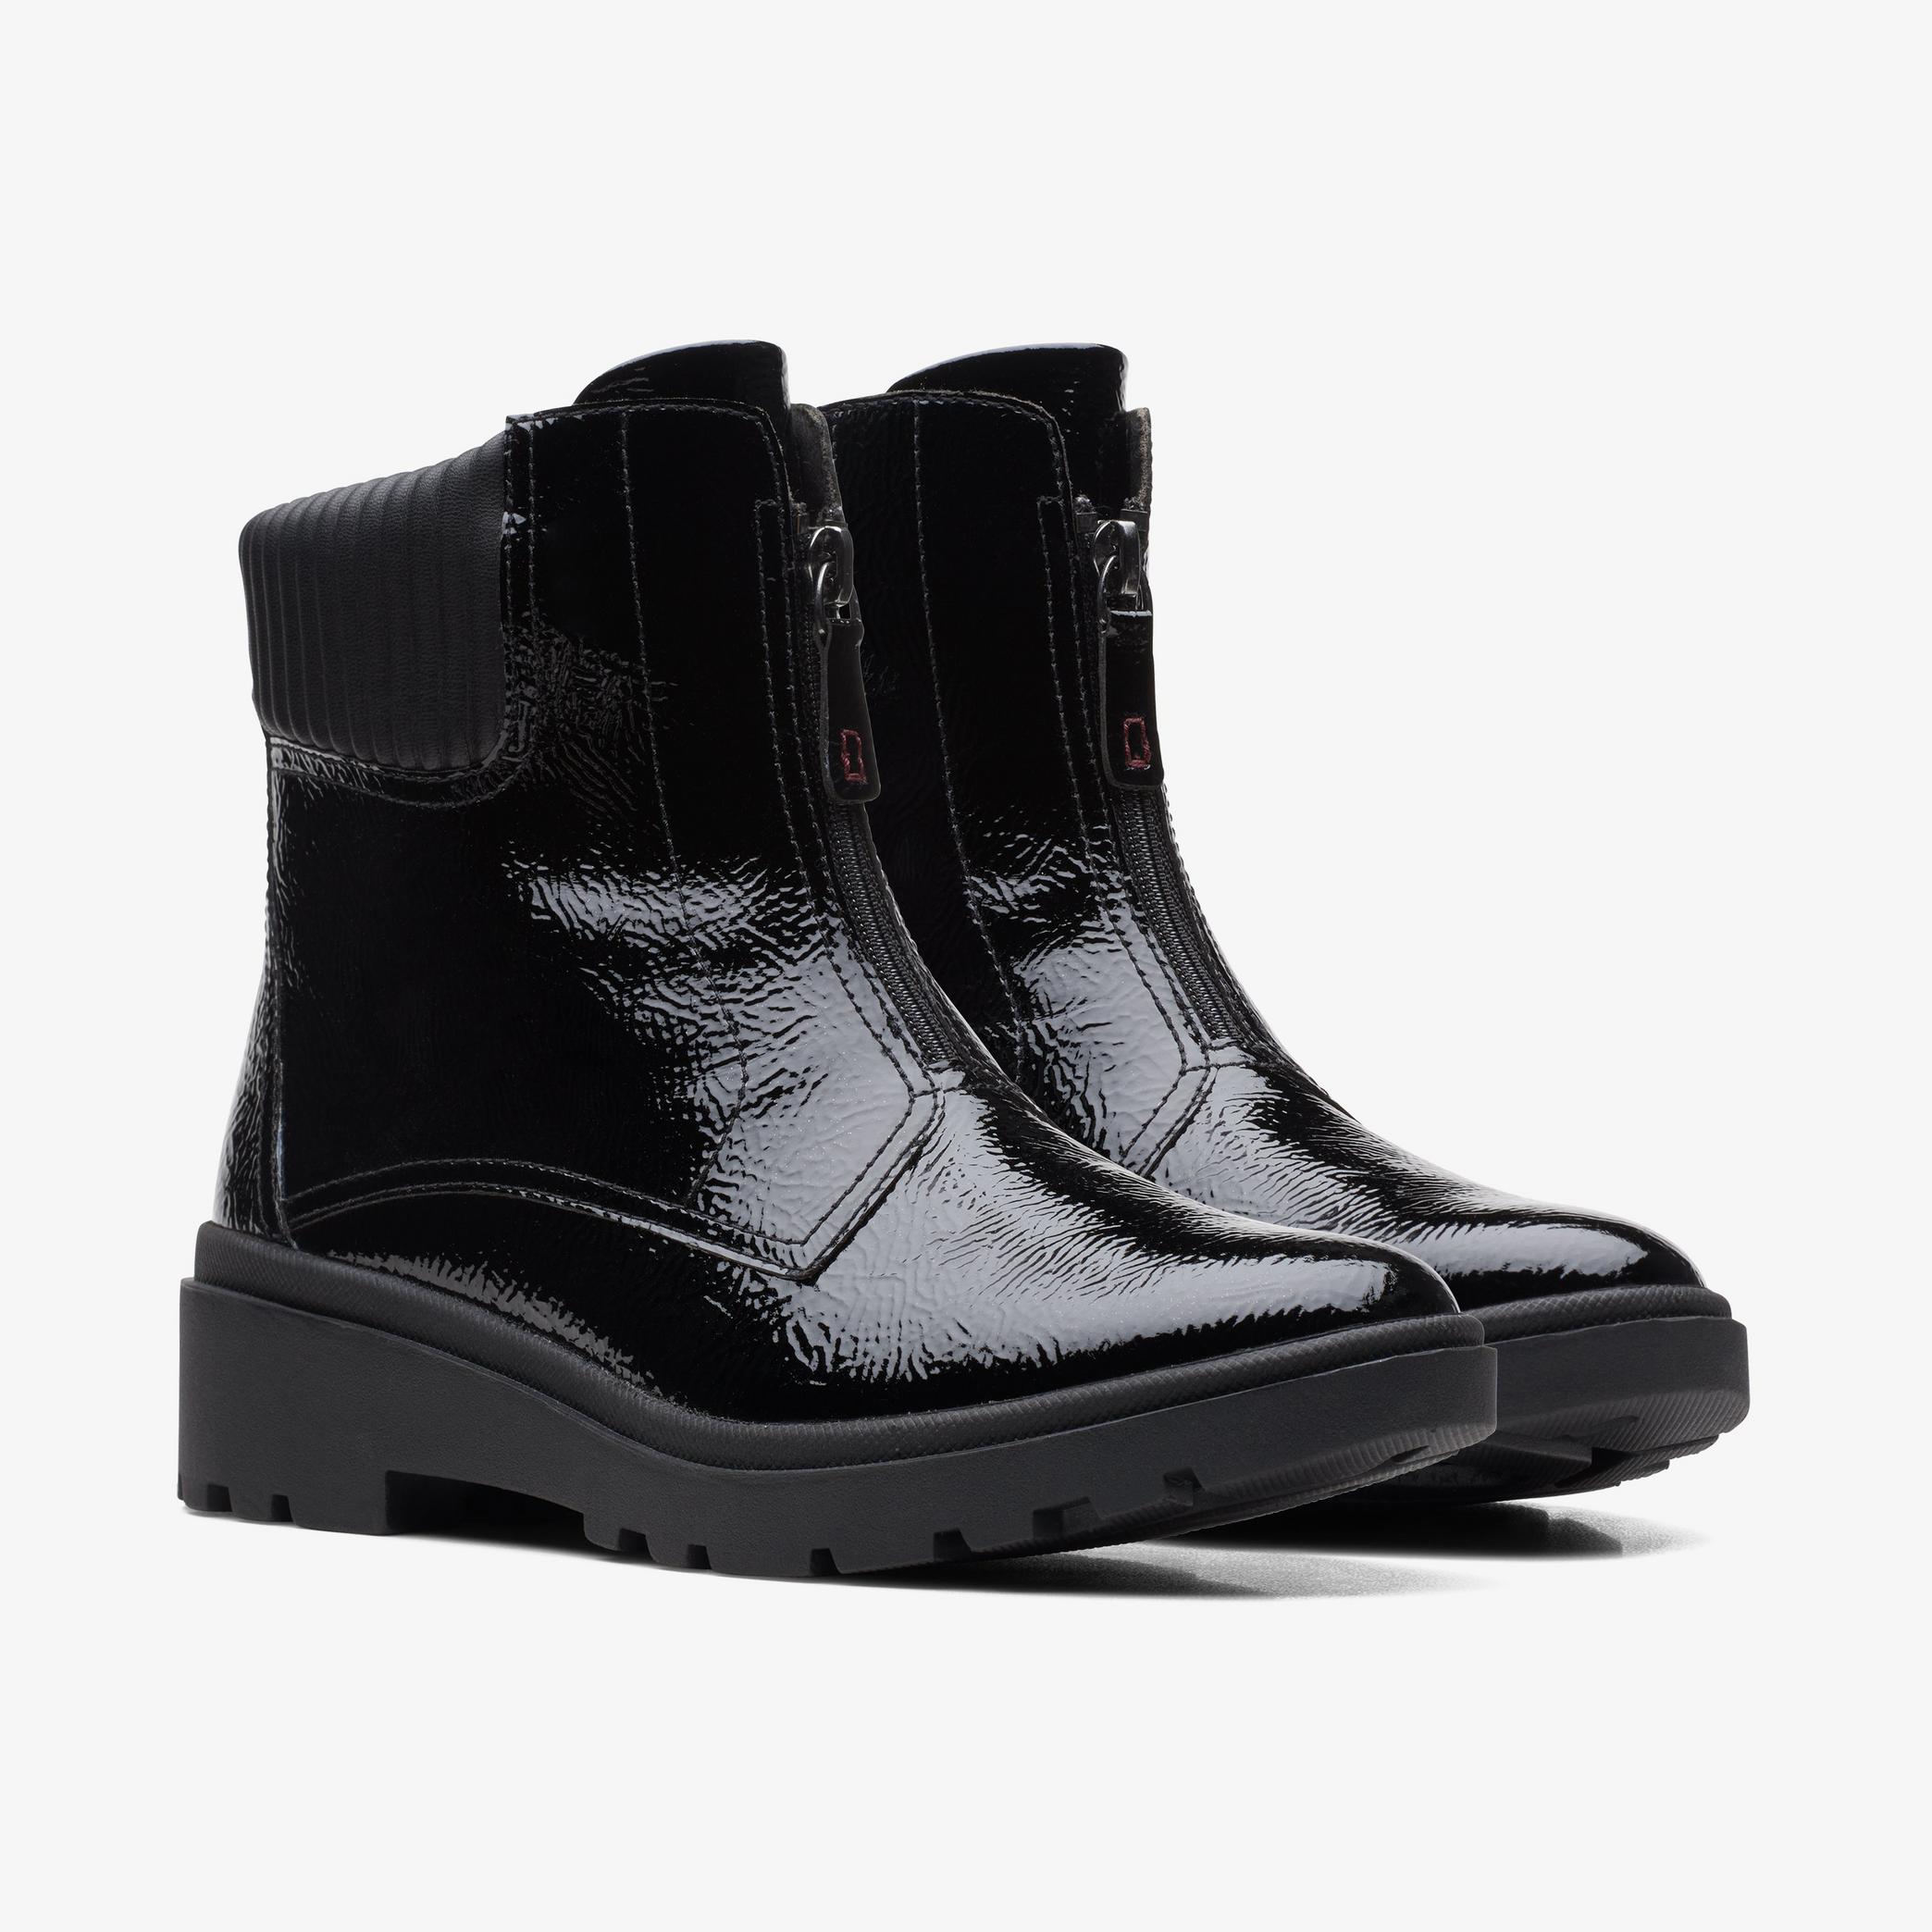 Calla Zip Black Crinkle Patent Ankle Boots, view 4 of 6